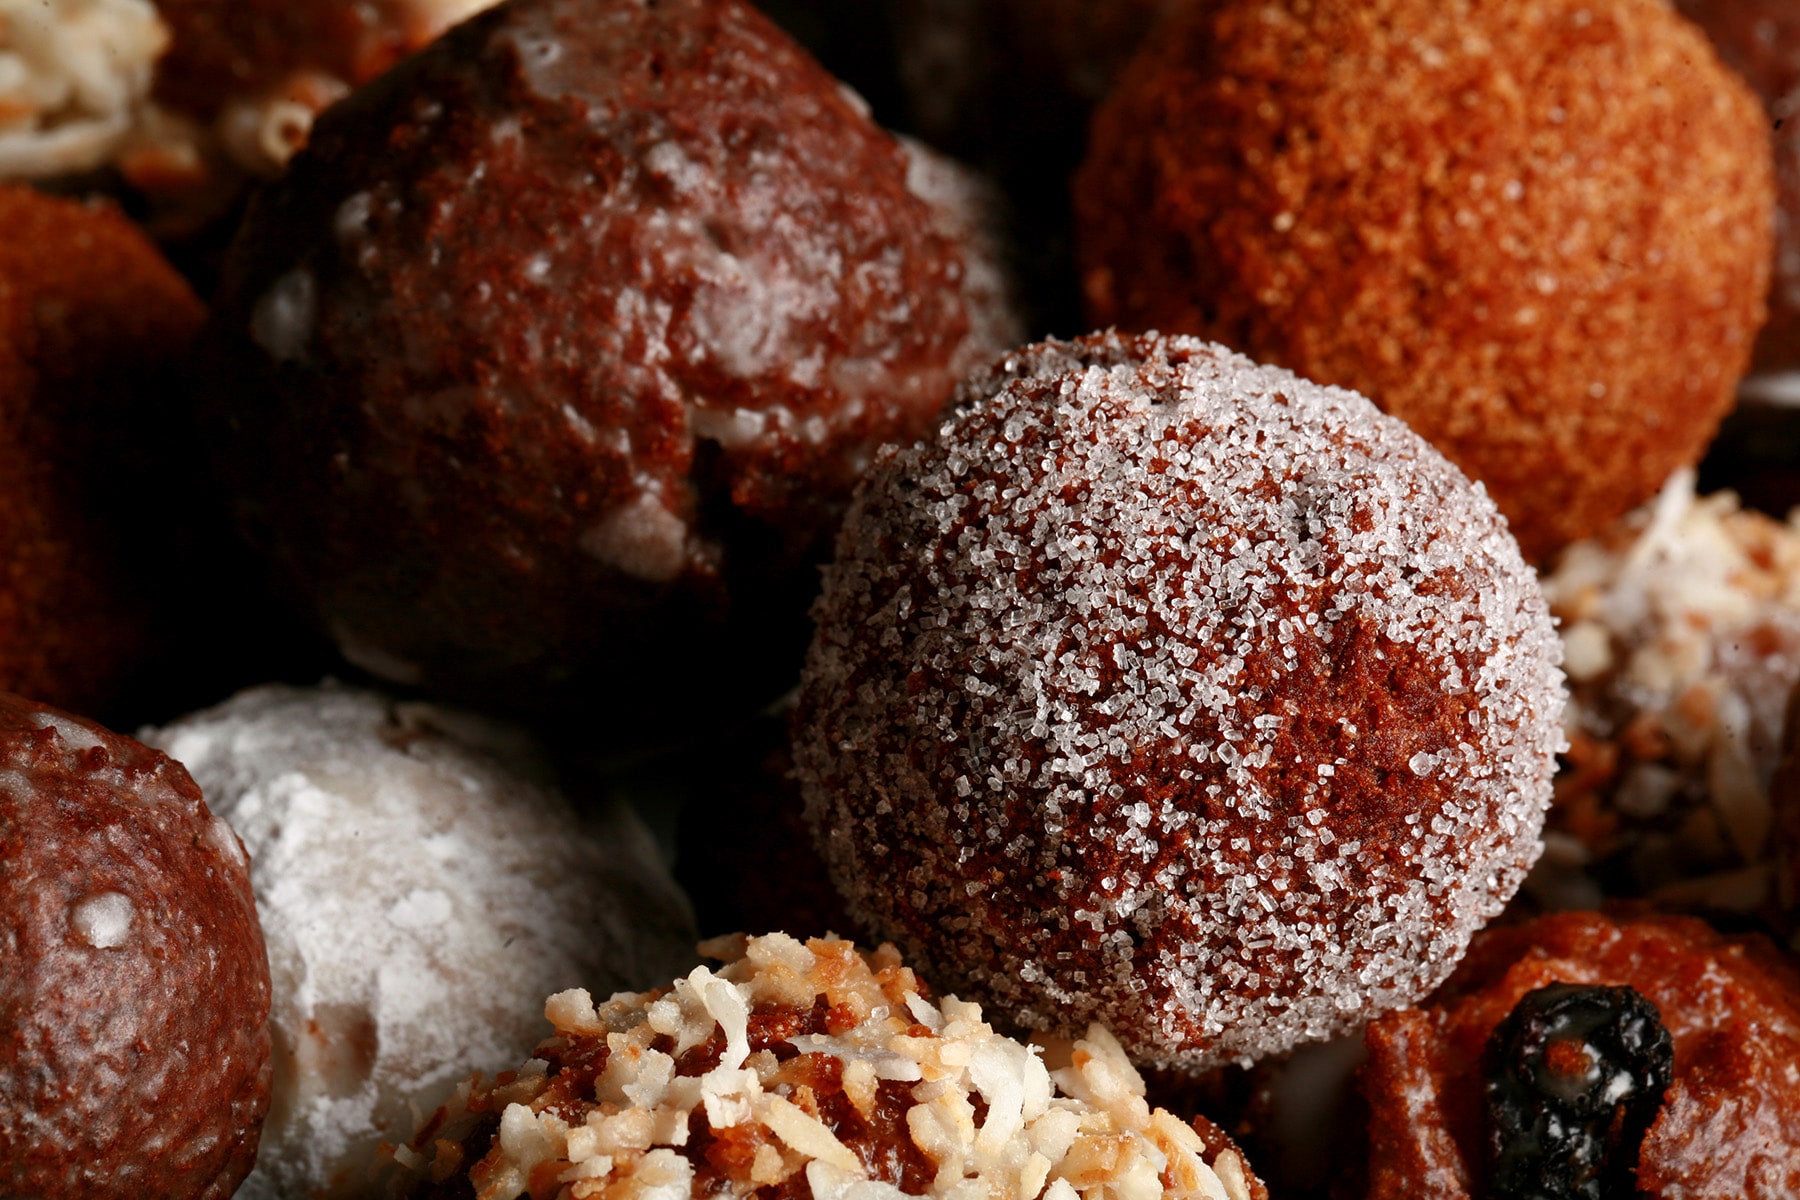 A close up view of an assortment of homemade doughnut holes: Toasted coconut, chocolate glazed, cinnamon sugar, powdered sugar, and dutchie versions are all visible.